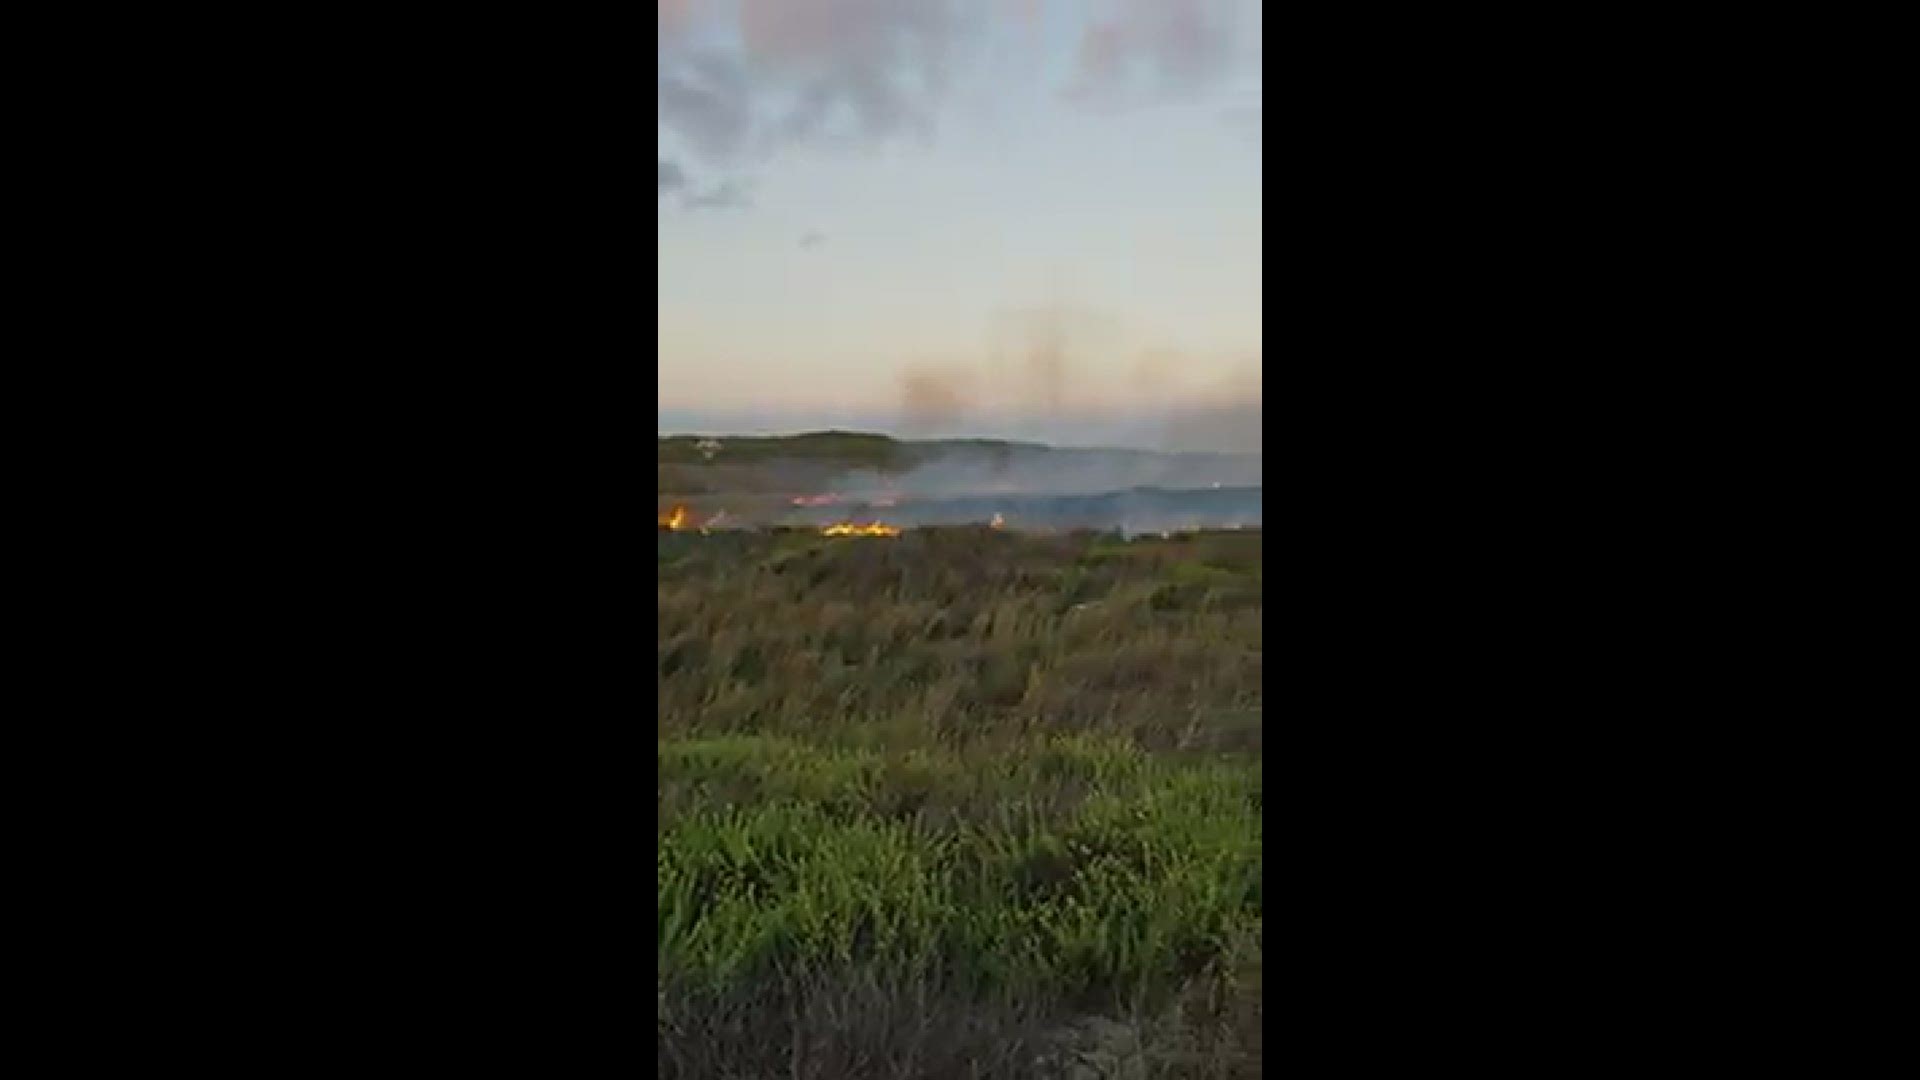 Nueces County fire crews are working to put out an early morning brush fire near Park Road 22